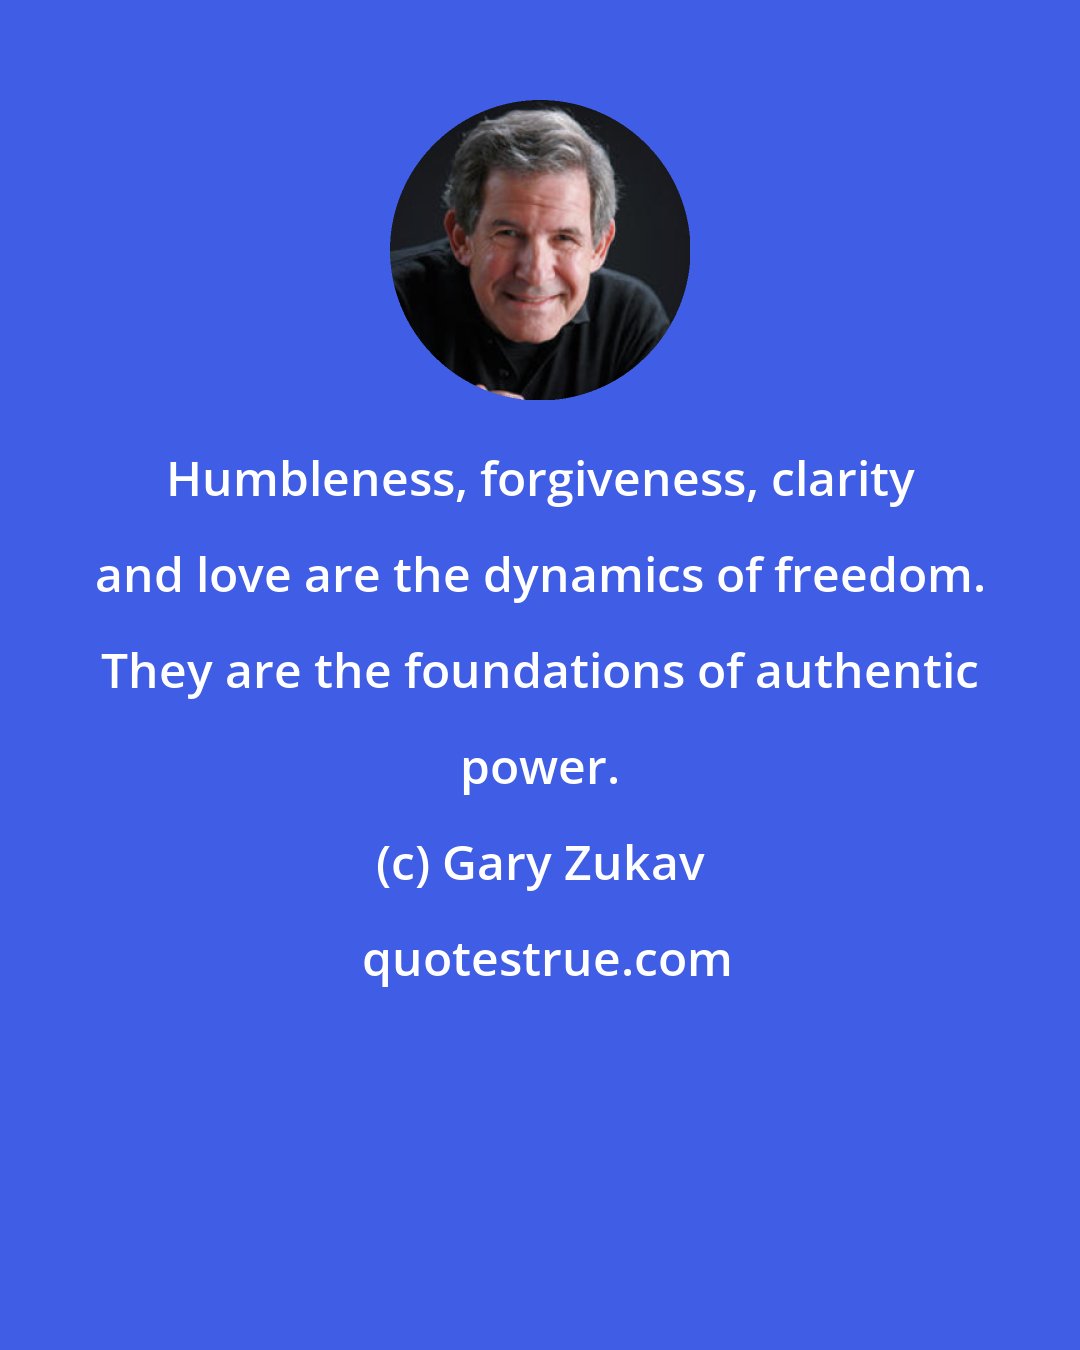 Gary Zukav: Humbleness, forgiveness, clarity and love are the dynamics of freedom. They are the foundations of authentic power.